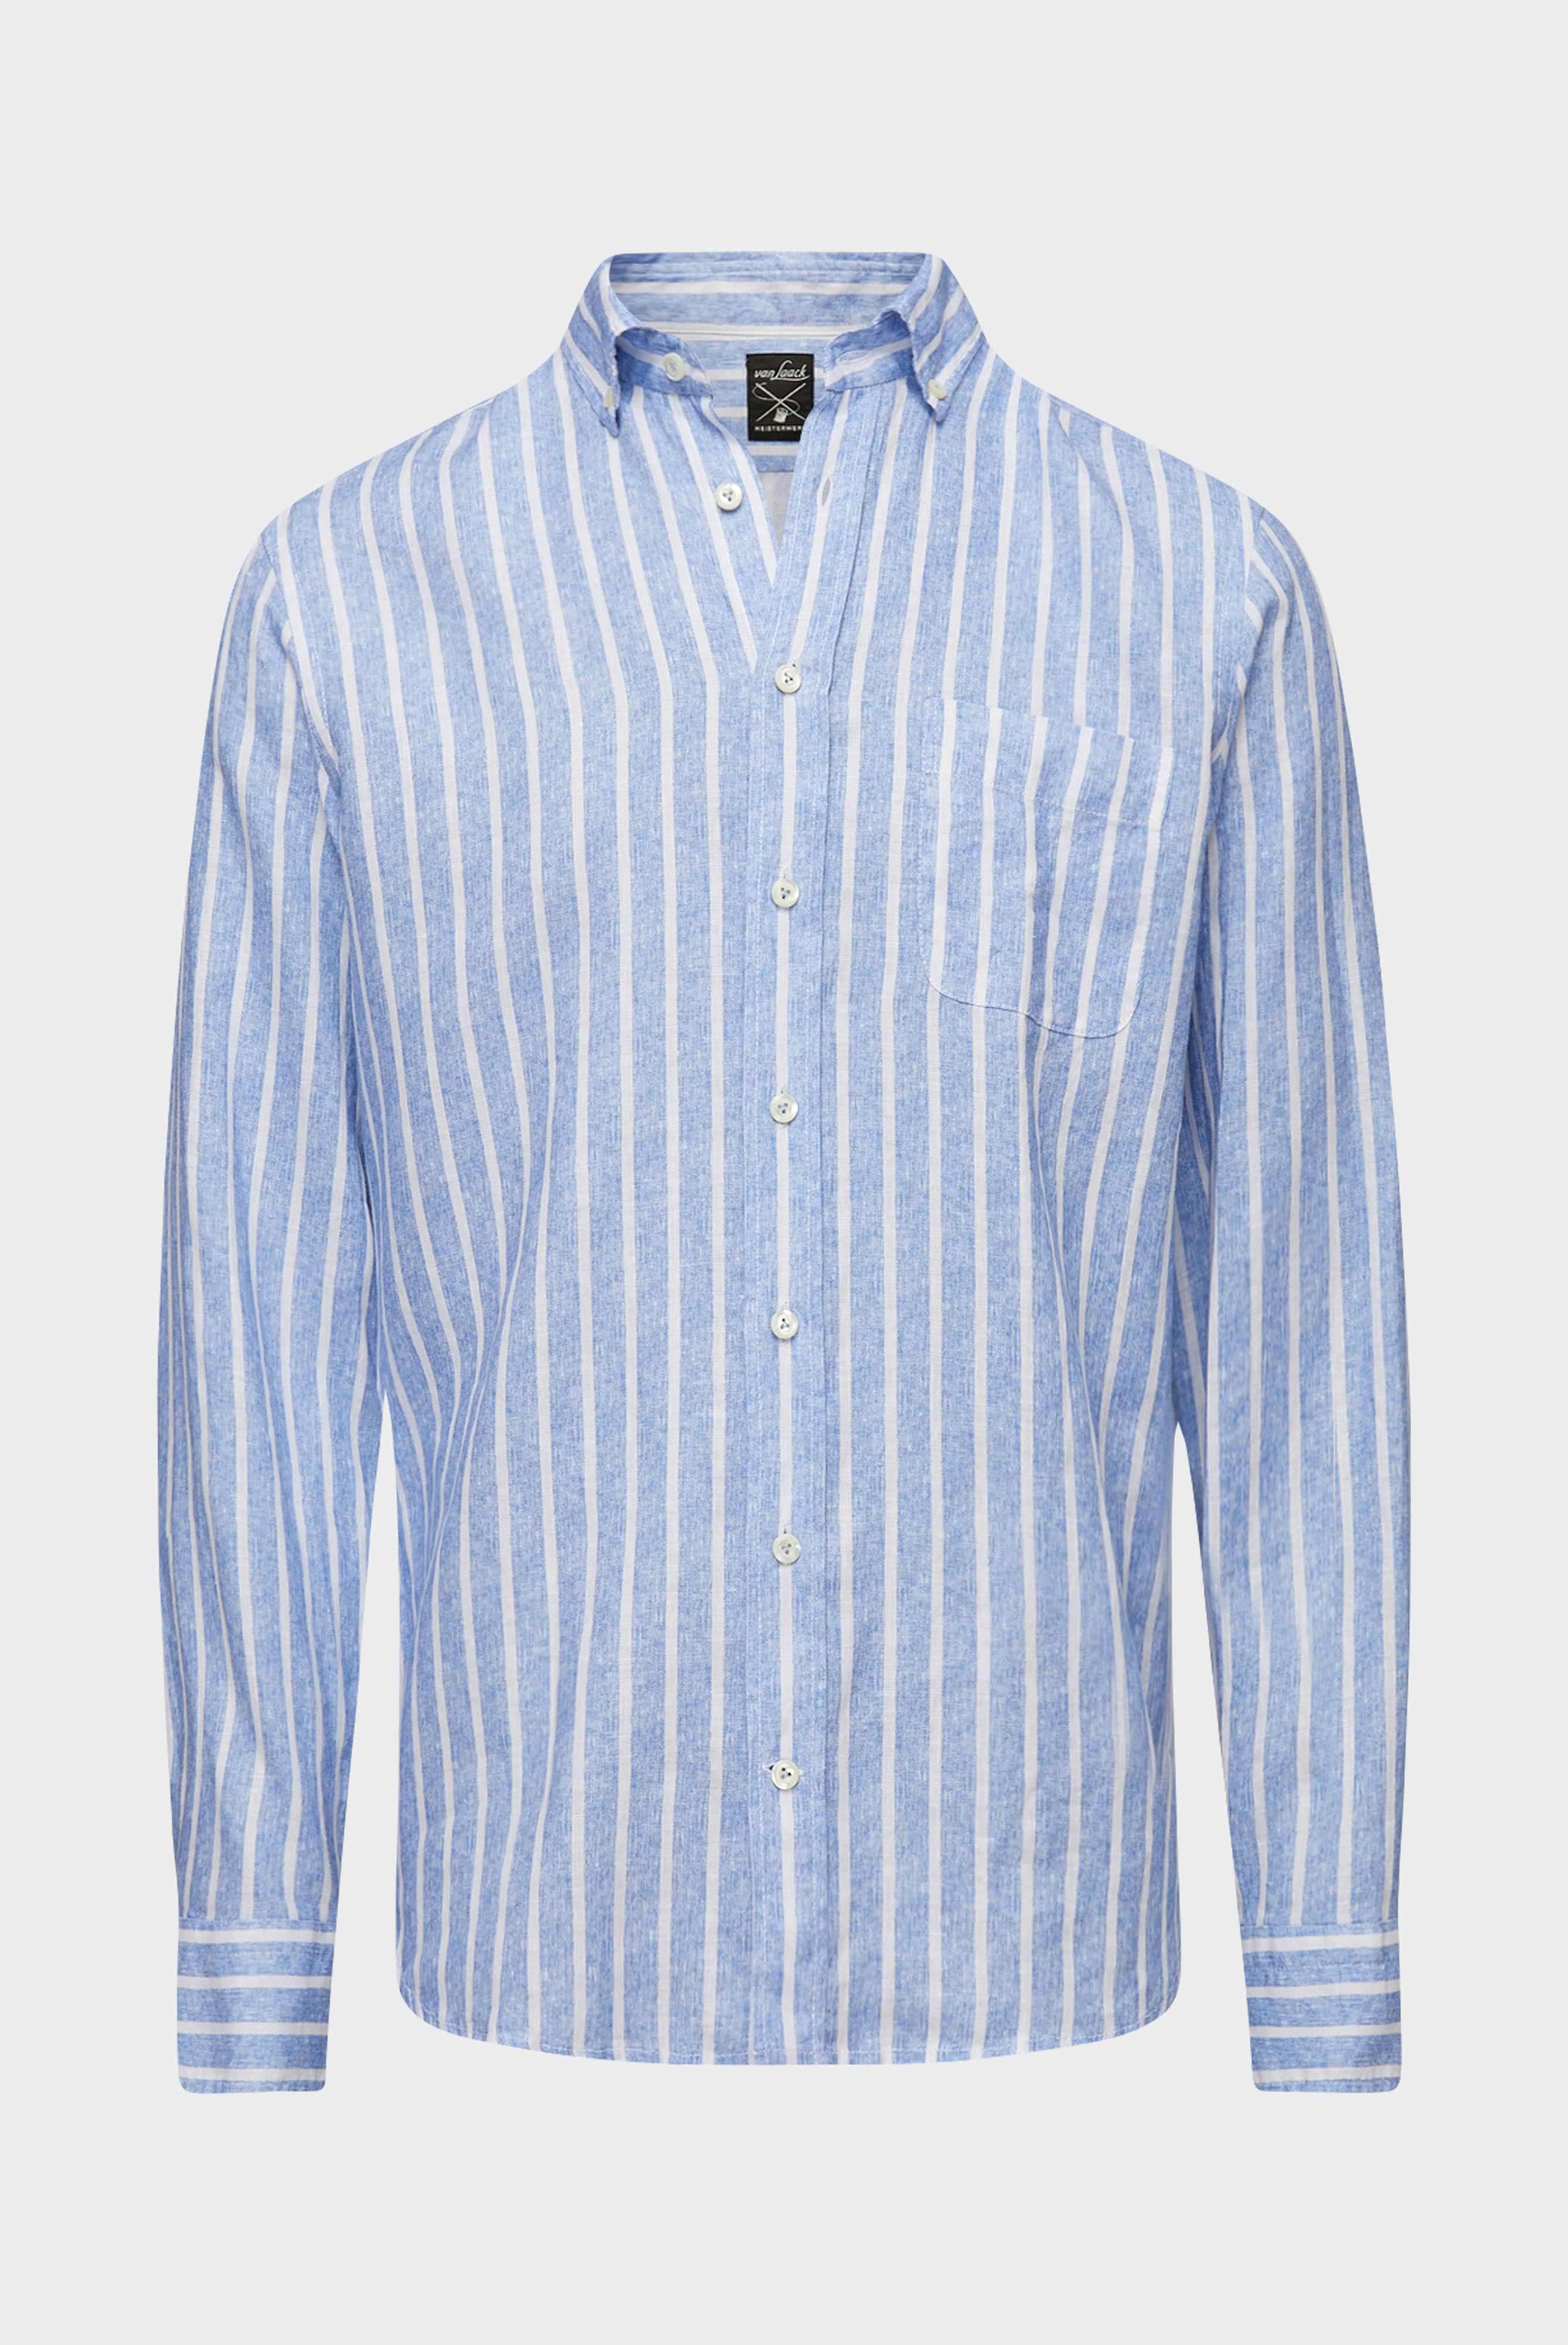 Casual Shirts+Linen button-down hem with stripe print+20.2013.MB.170238.760.39